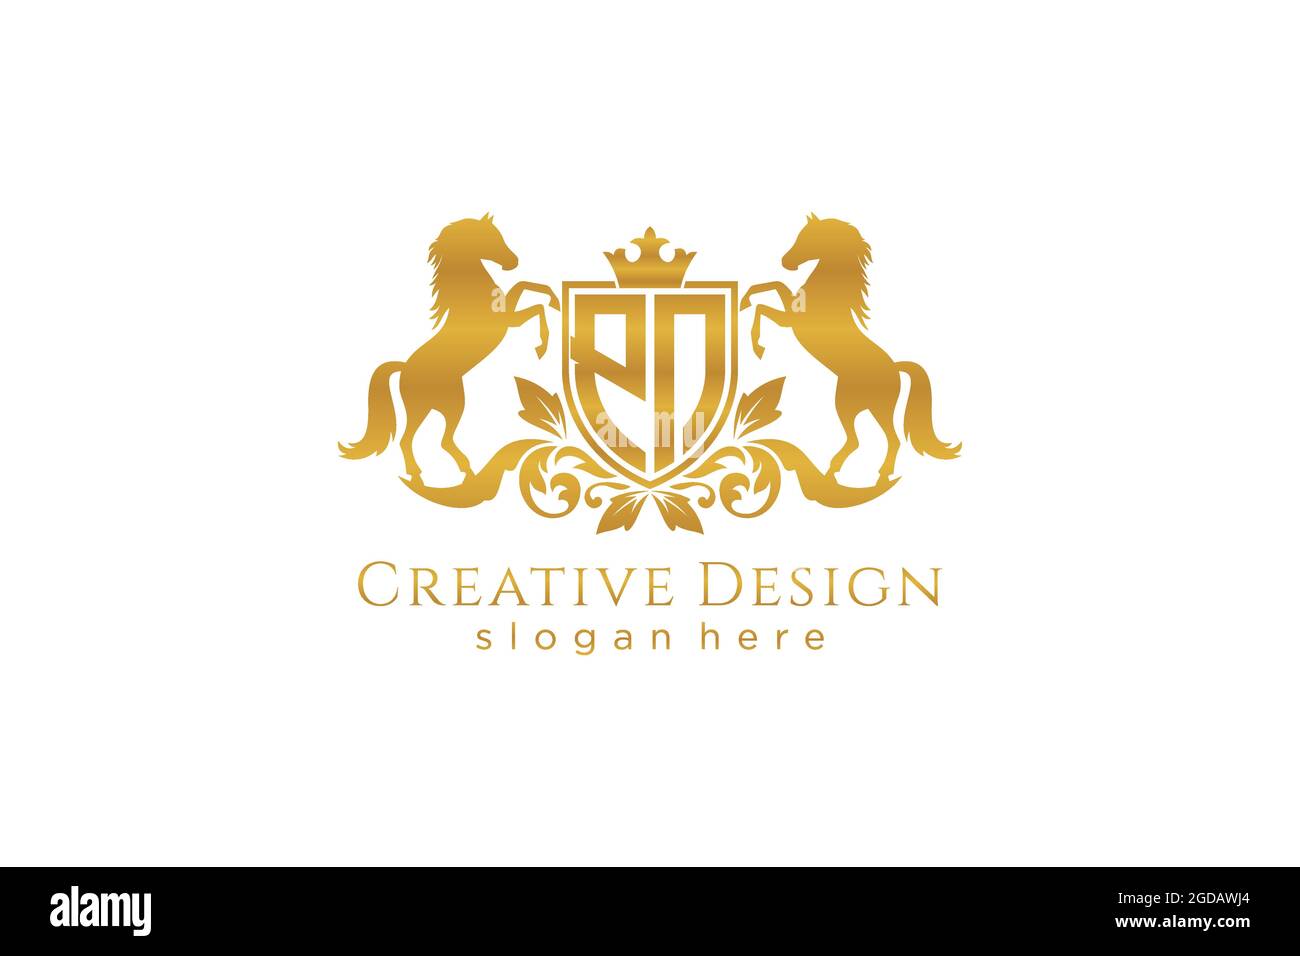 PN Retro golden crest with shield and two horses, badge template with scrolls and royal crown - perfect for luxurious branding projects Stock Vector